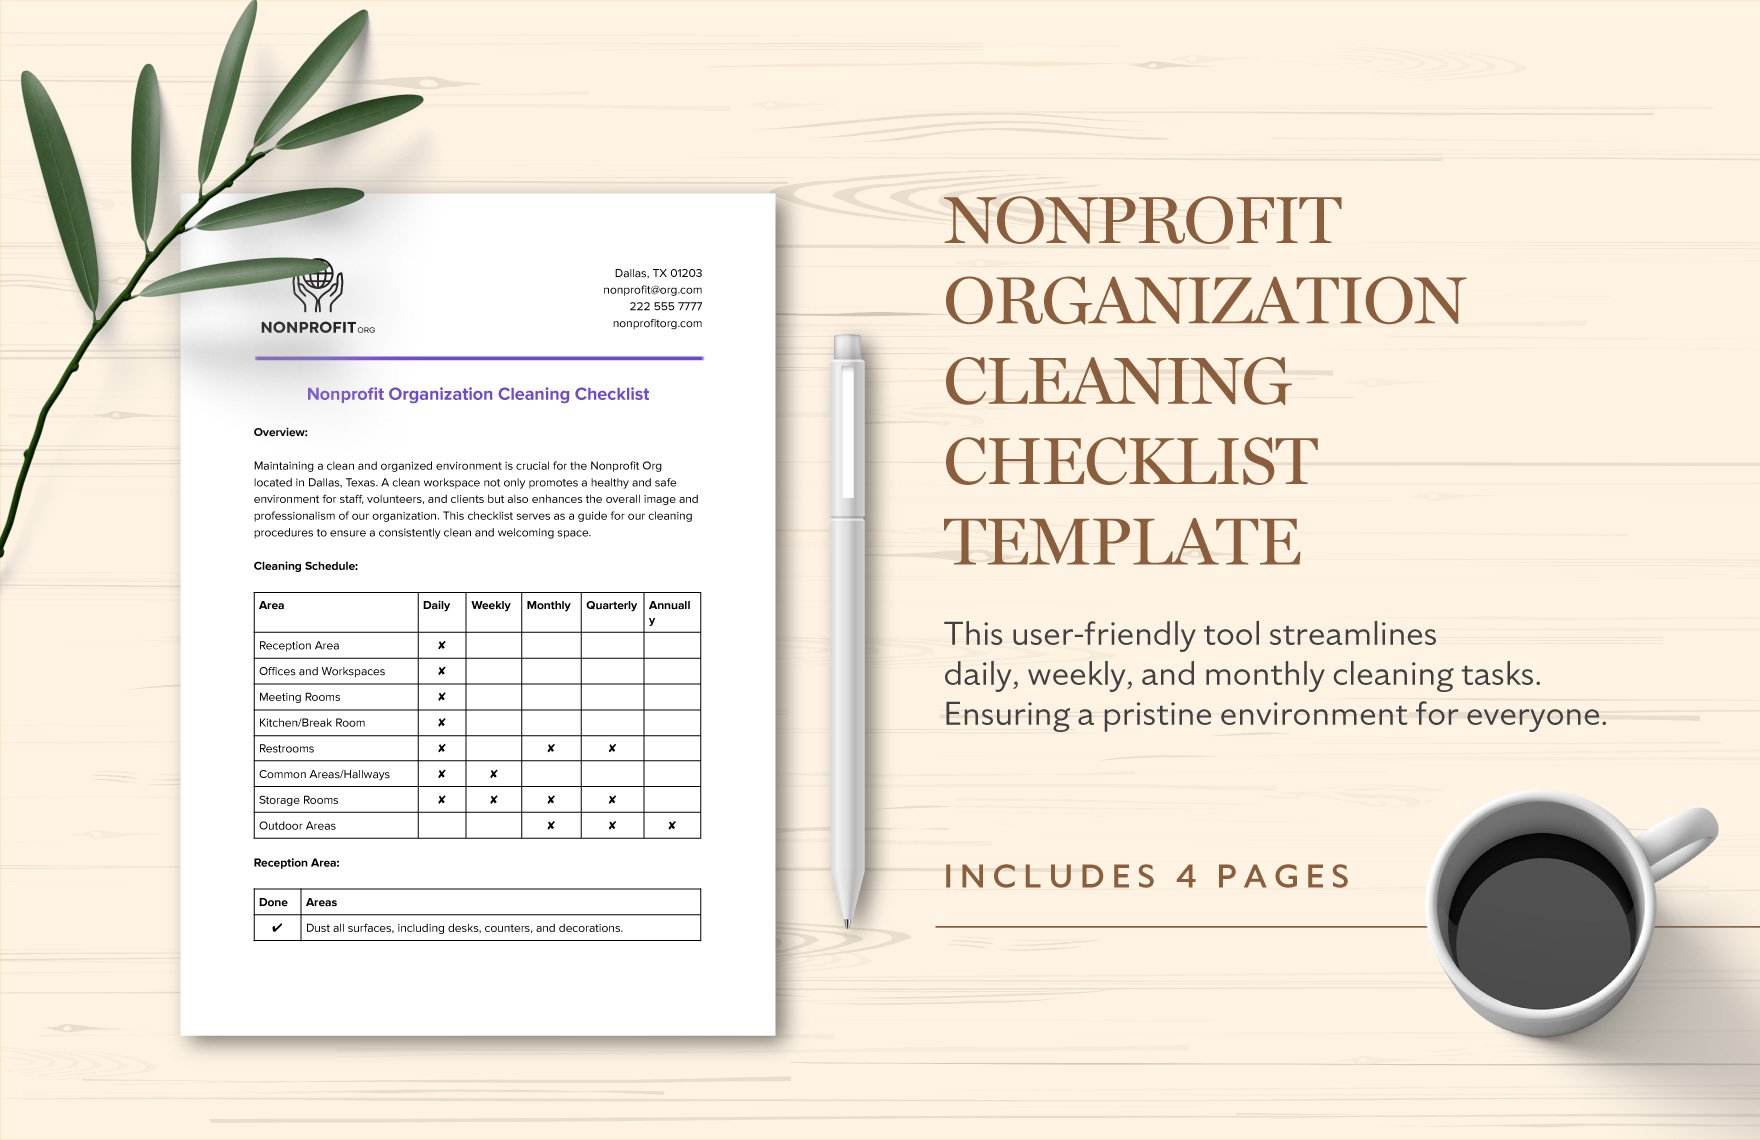 Nonprofit Organization Cleaning Checklist Template in Word, Google Docs, PDF